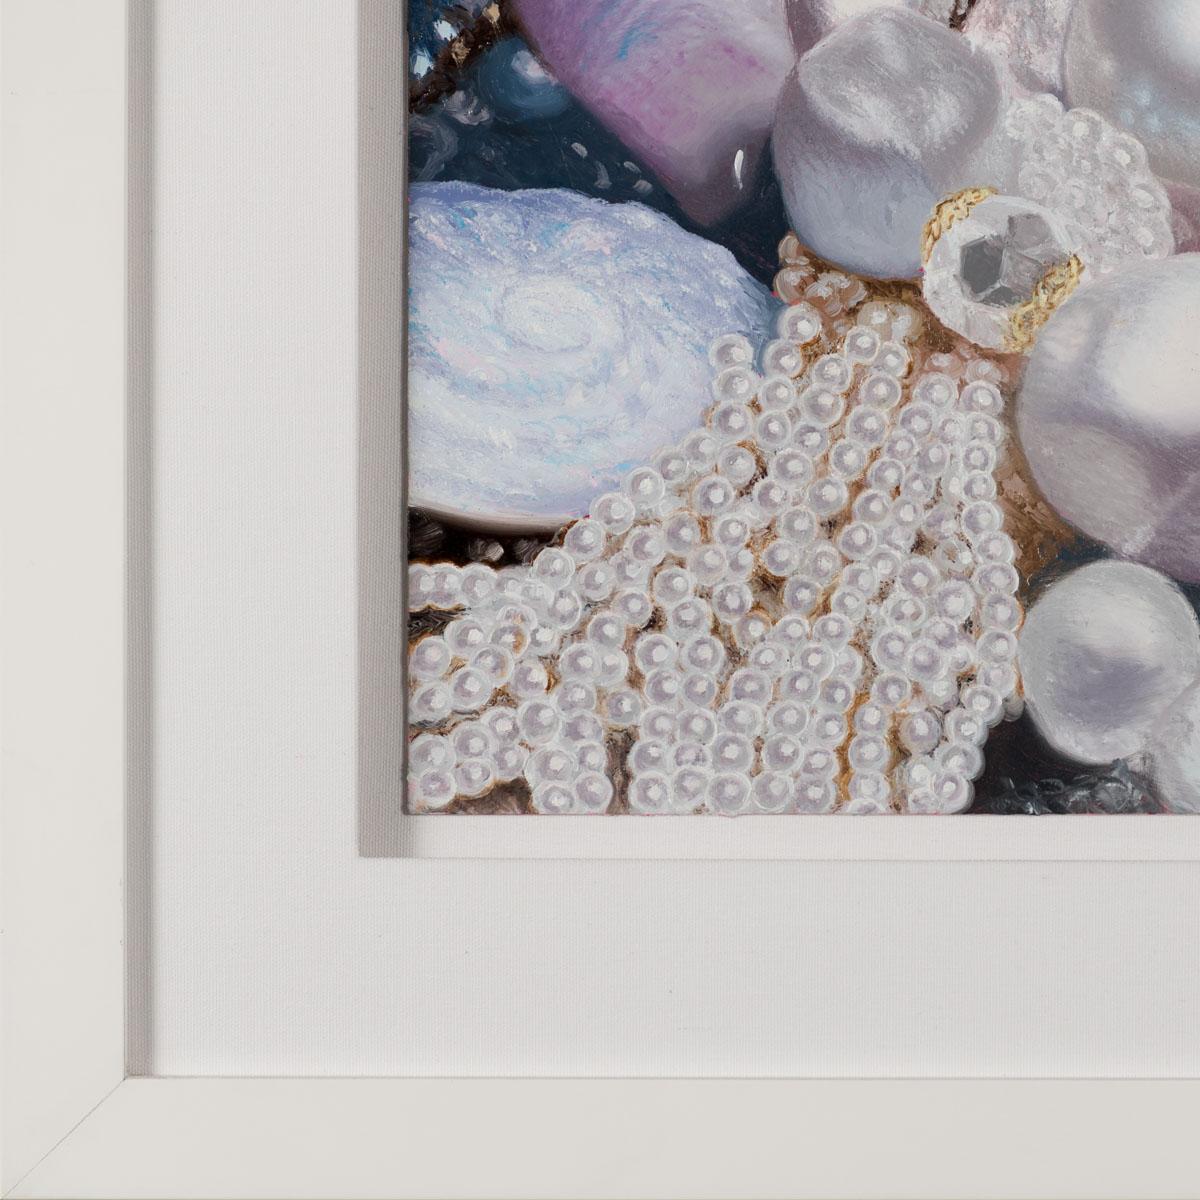 Oceanic Pearls is an oil painting on prepared paper, sheet size 15.75 x 22 inches, signed, titled and dated verso, 'Ben Weiner Oceanic Pearls 2019' and framed in a contemporary white frame.

Connecting two opposing styles—abstraction